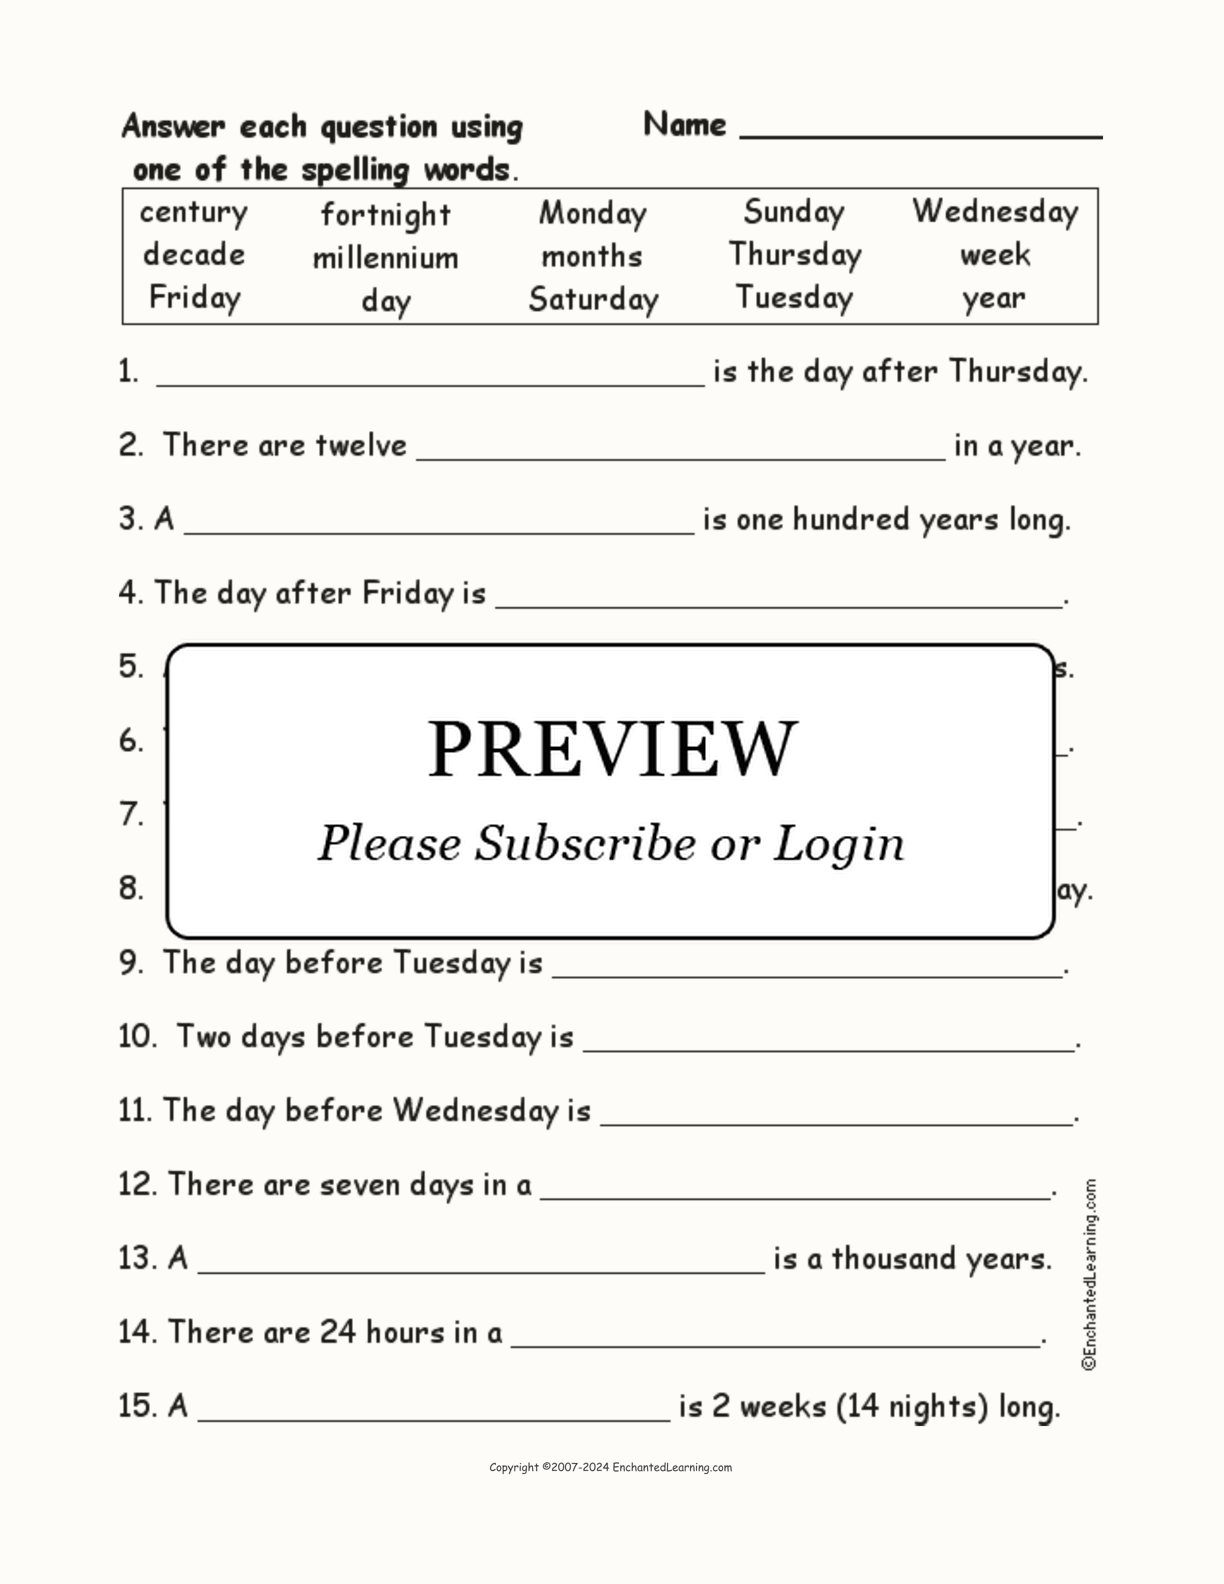 Calendar Spelling Word Questions interactive worksheet page 1